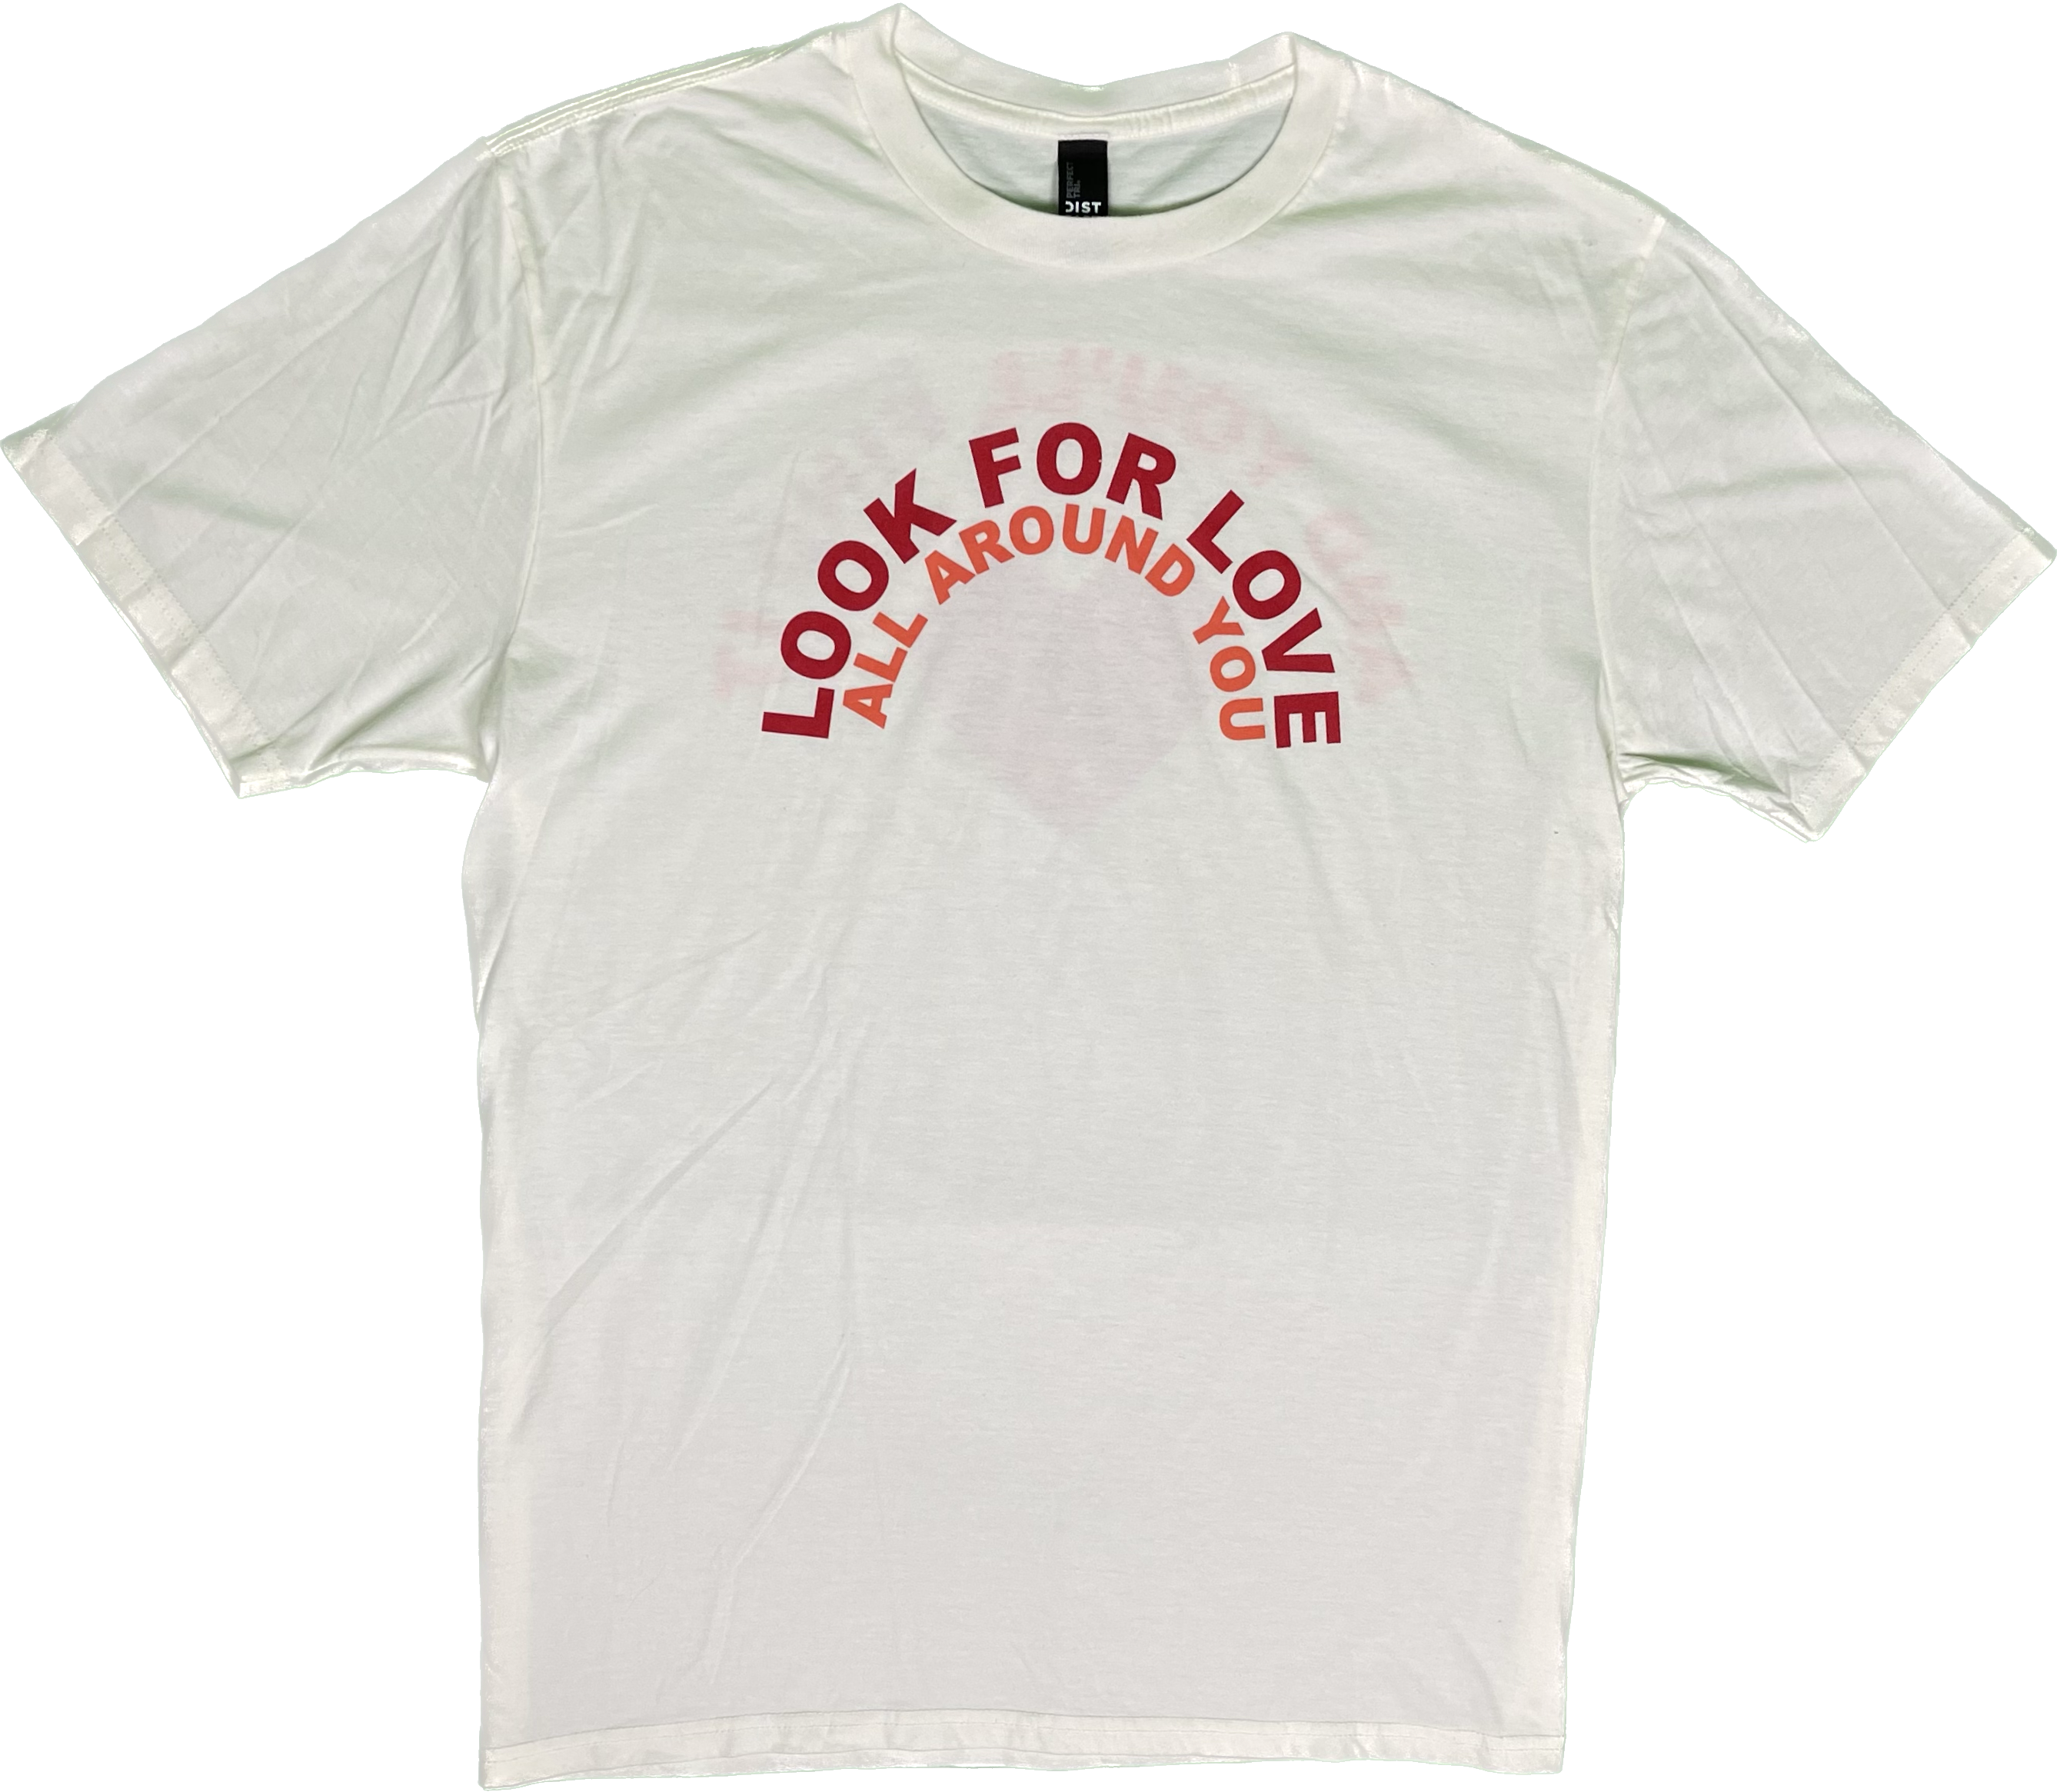 Look for Love Shirt